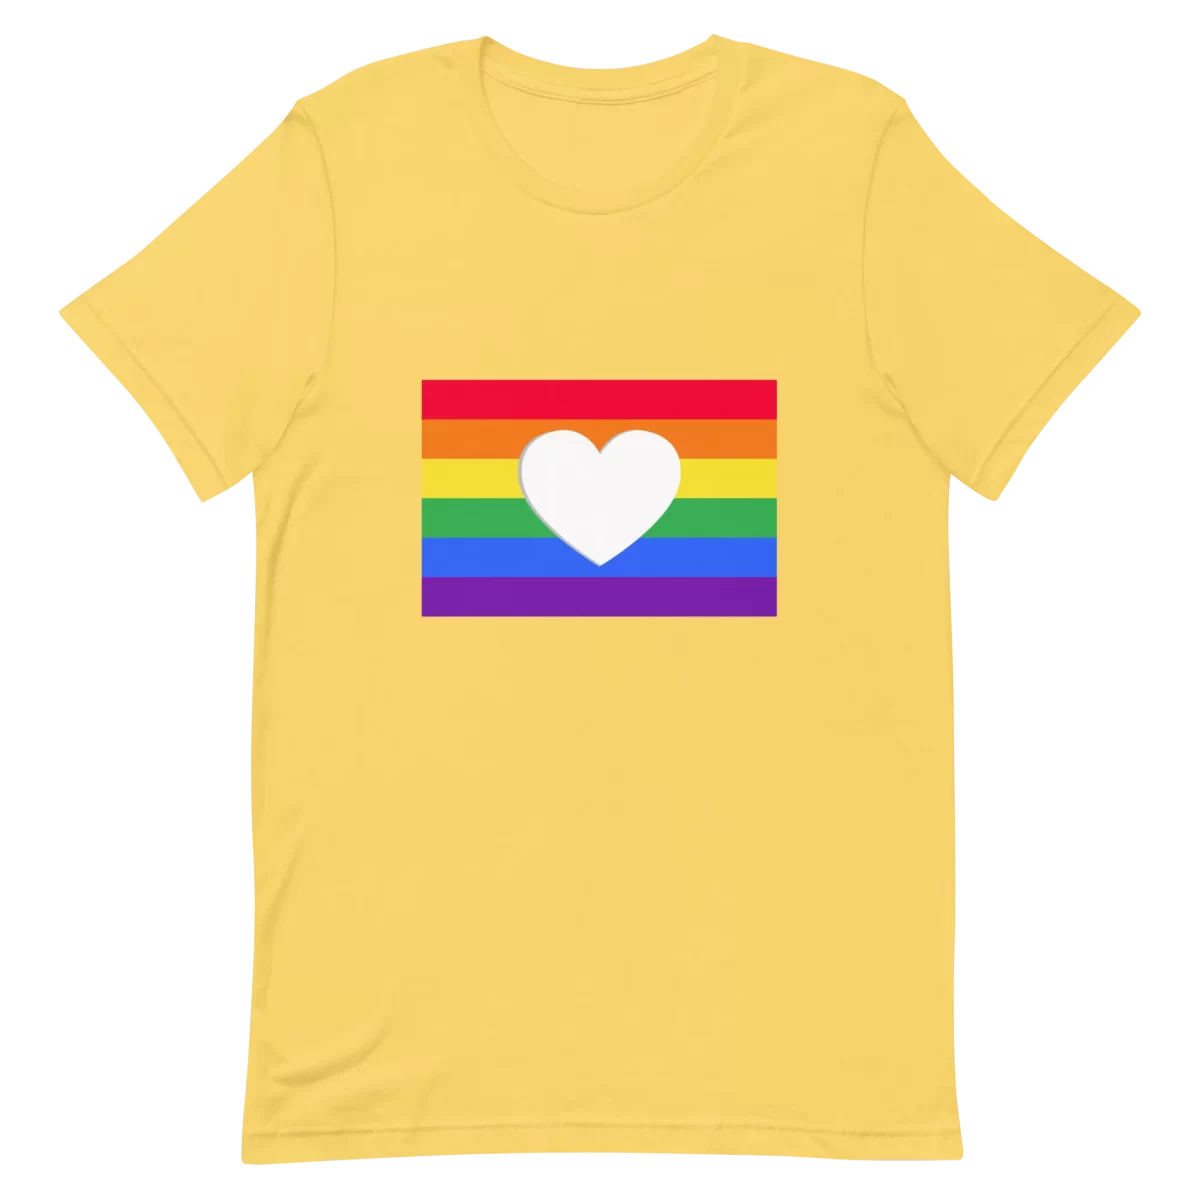 Yellow Unisex t-shirt Pride Day Flag With Heart